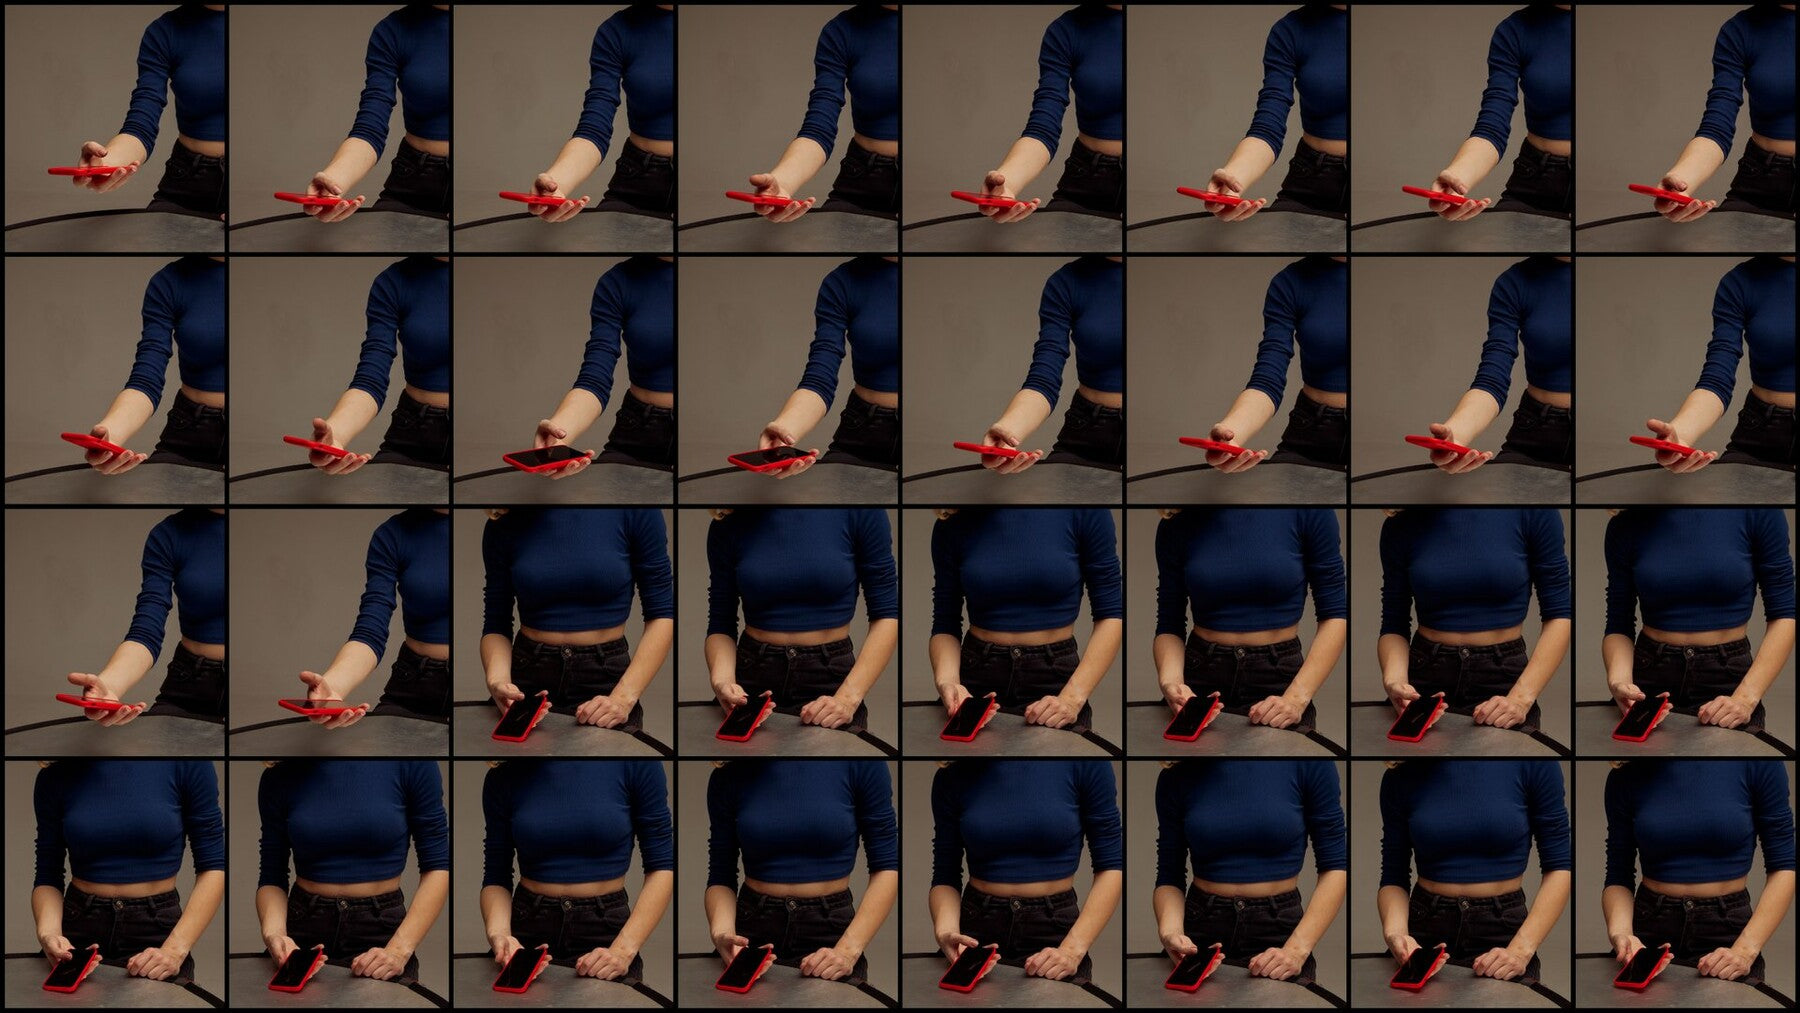 900+ Reference Photos - Female Hand in Motion ( Sequential Movement )